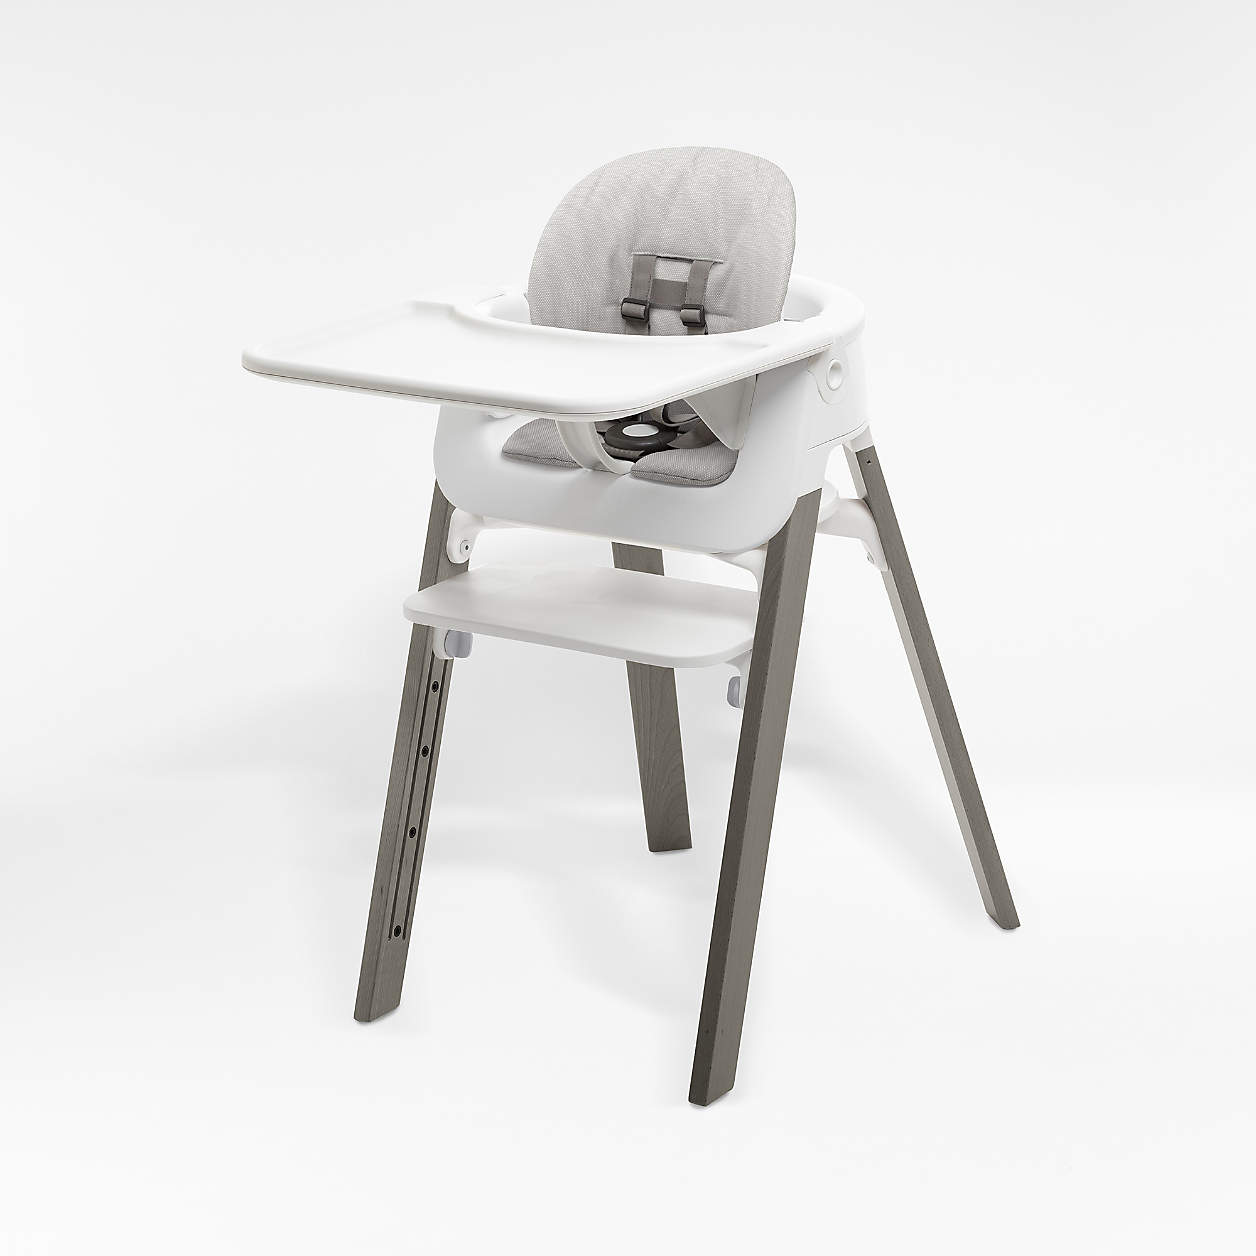 Stokke Steps Hazy Grey/White Adjustable High Chair Complete + Reviews ...